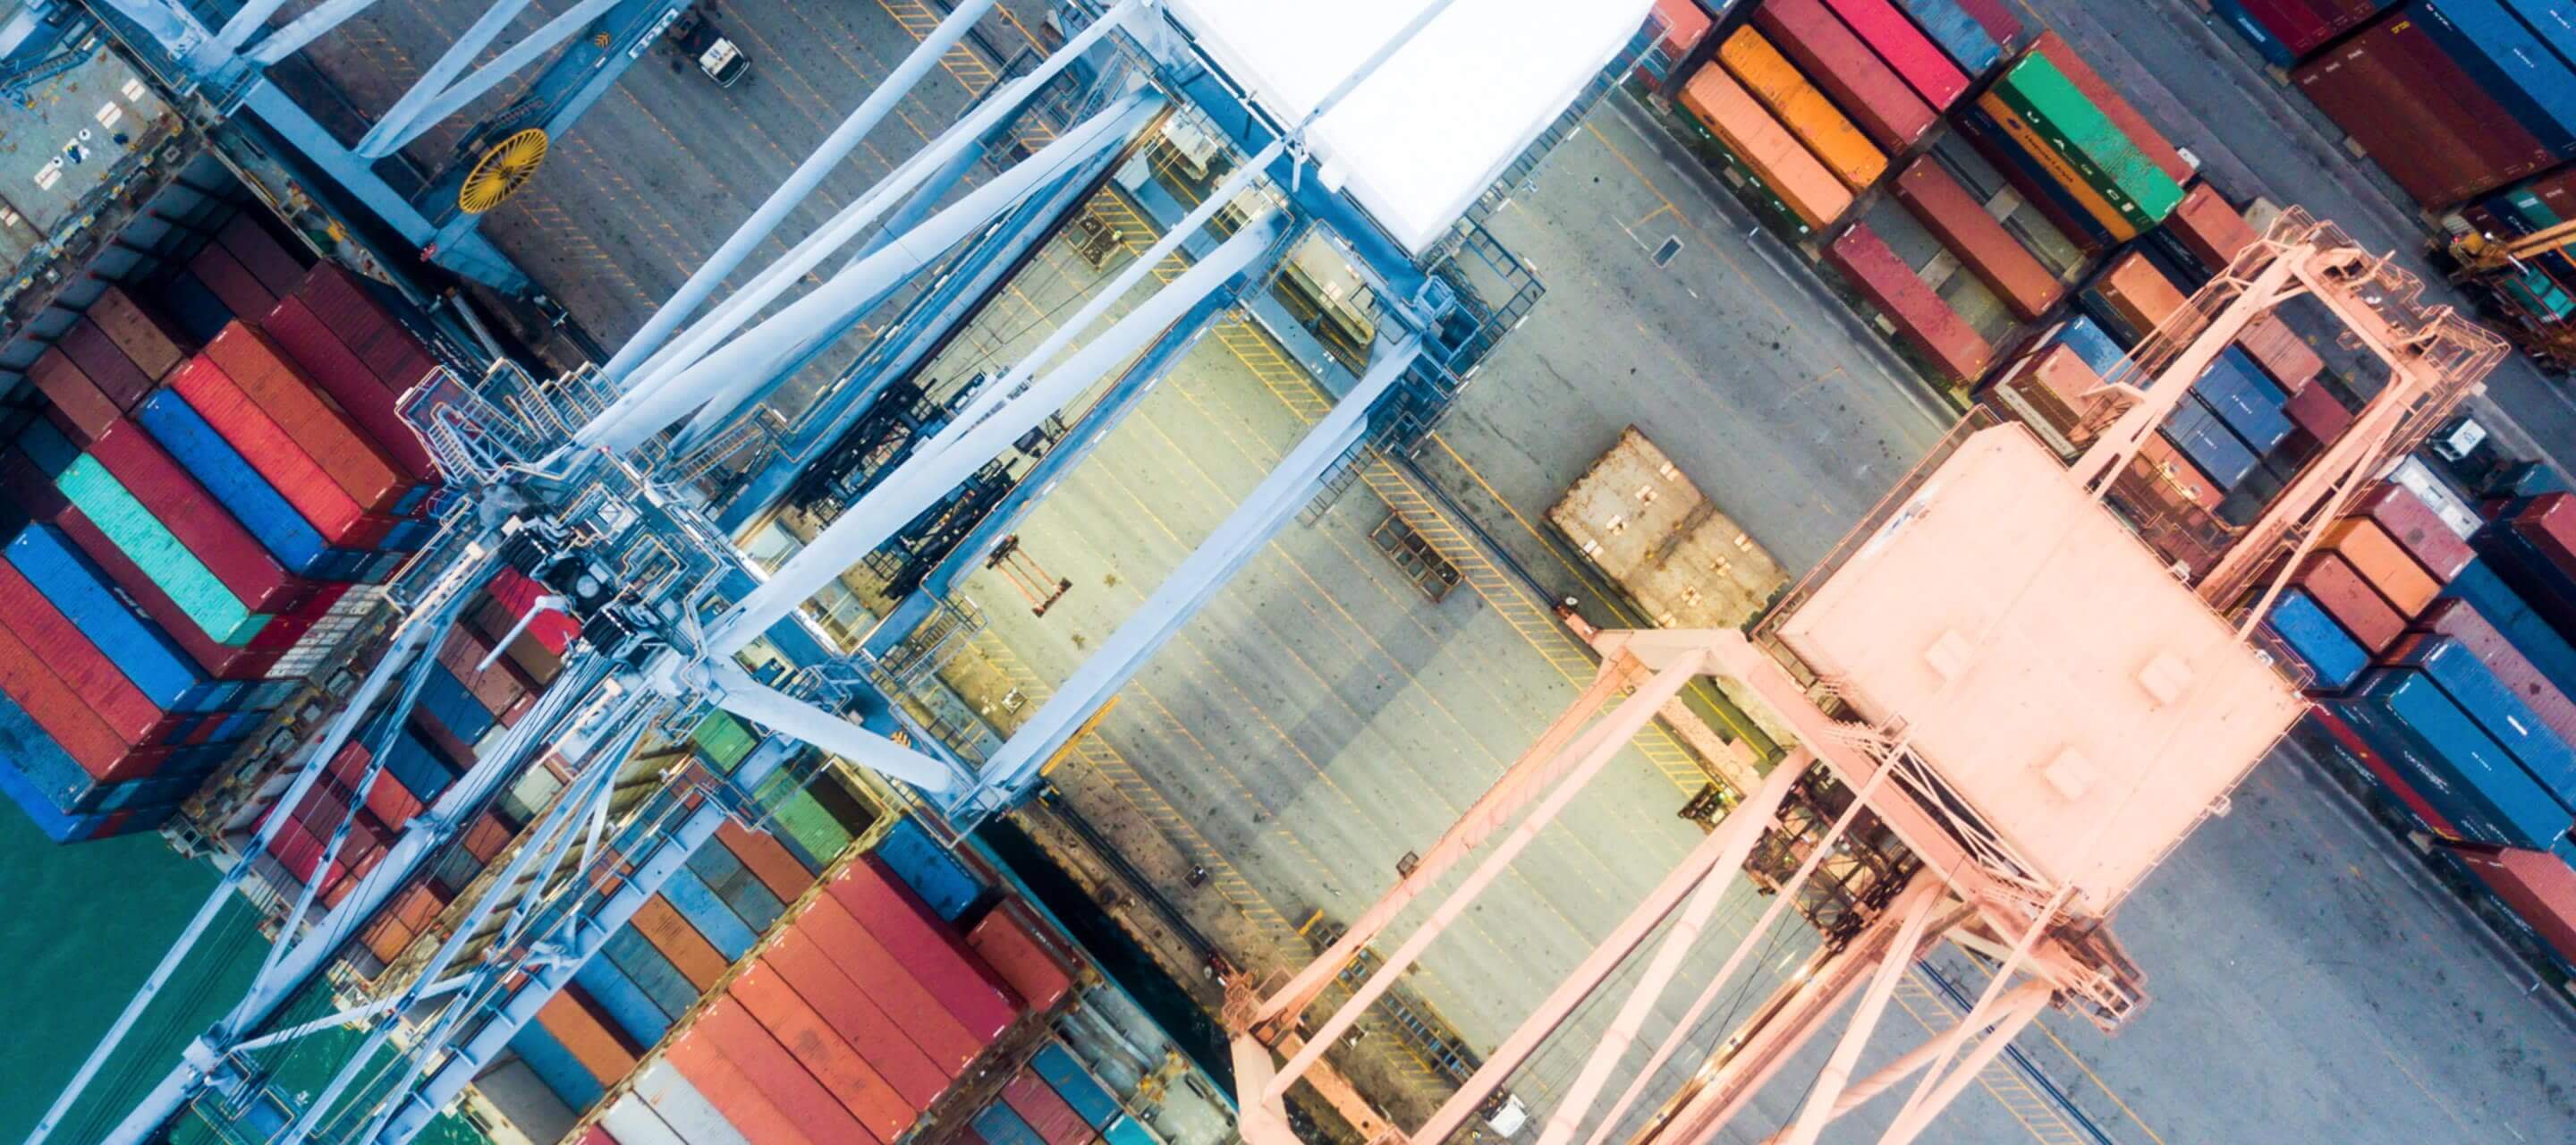 Cargo containers from an overhead viewpoint